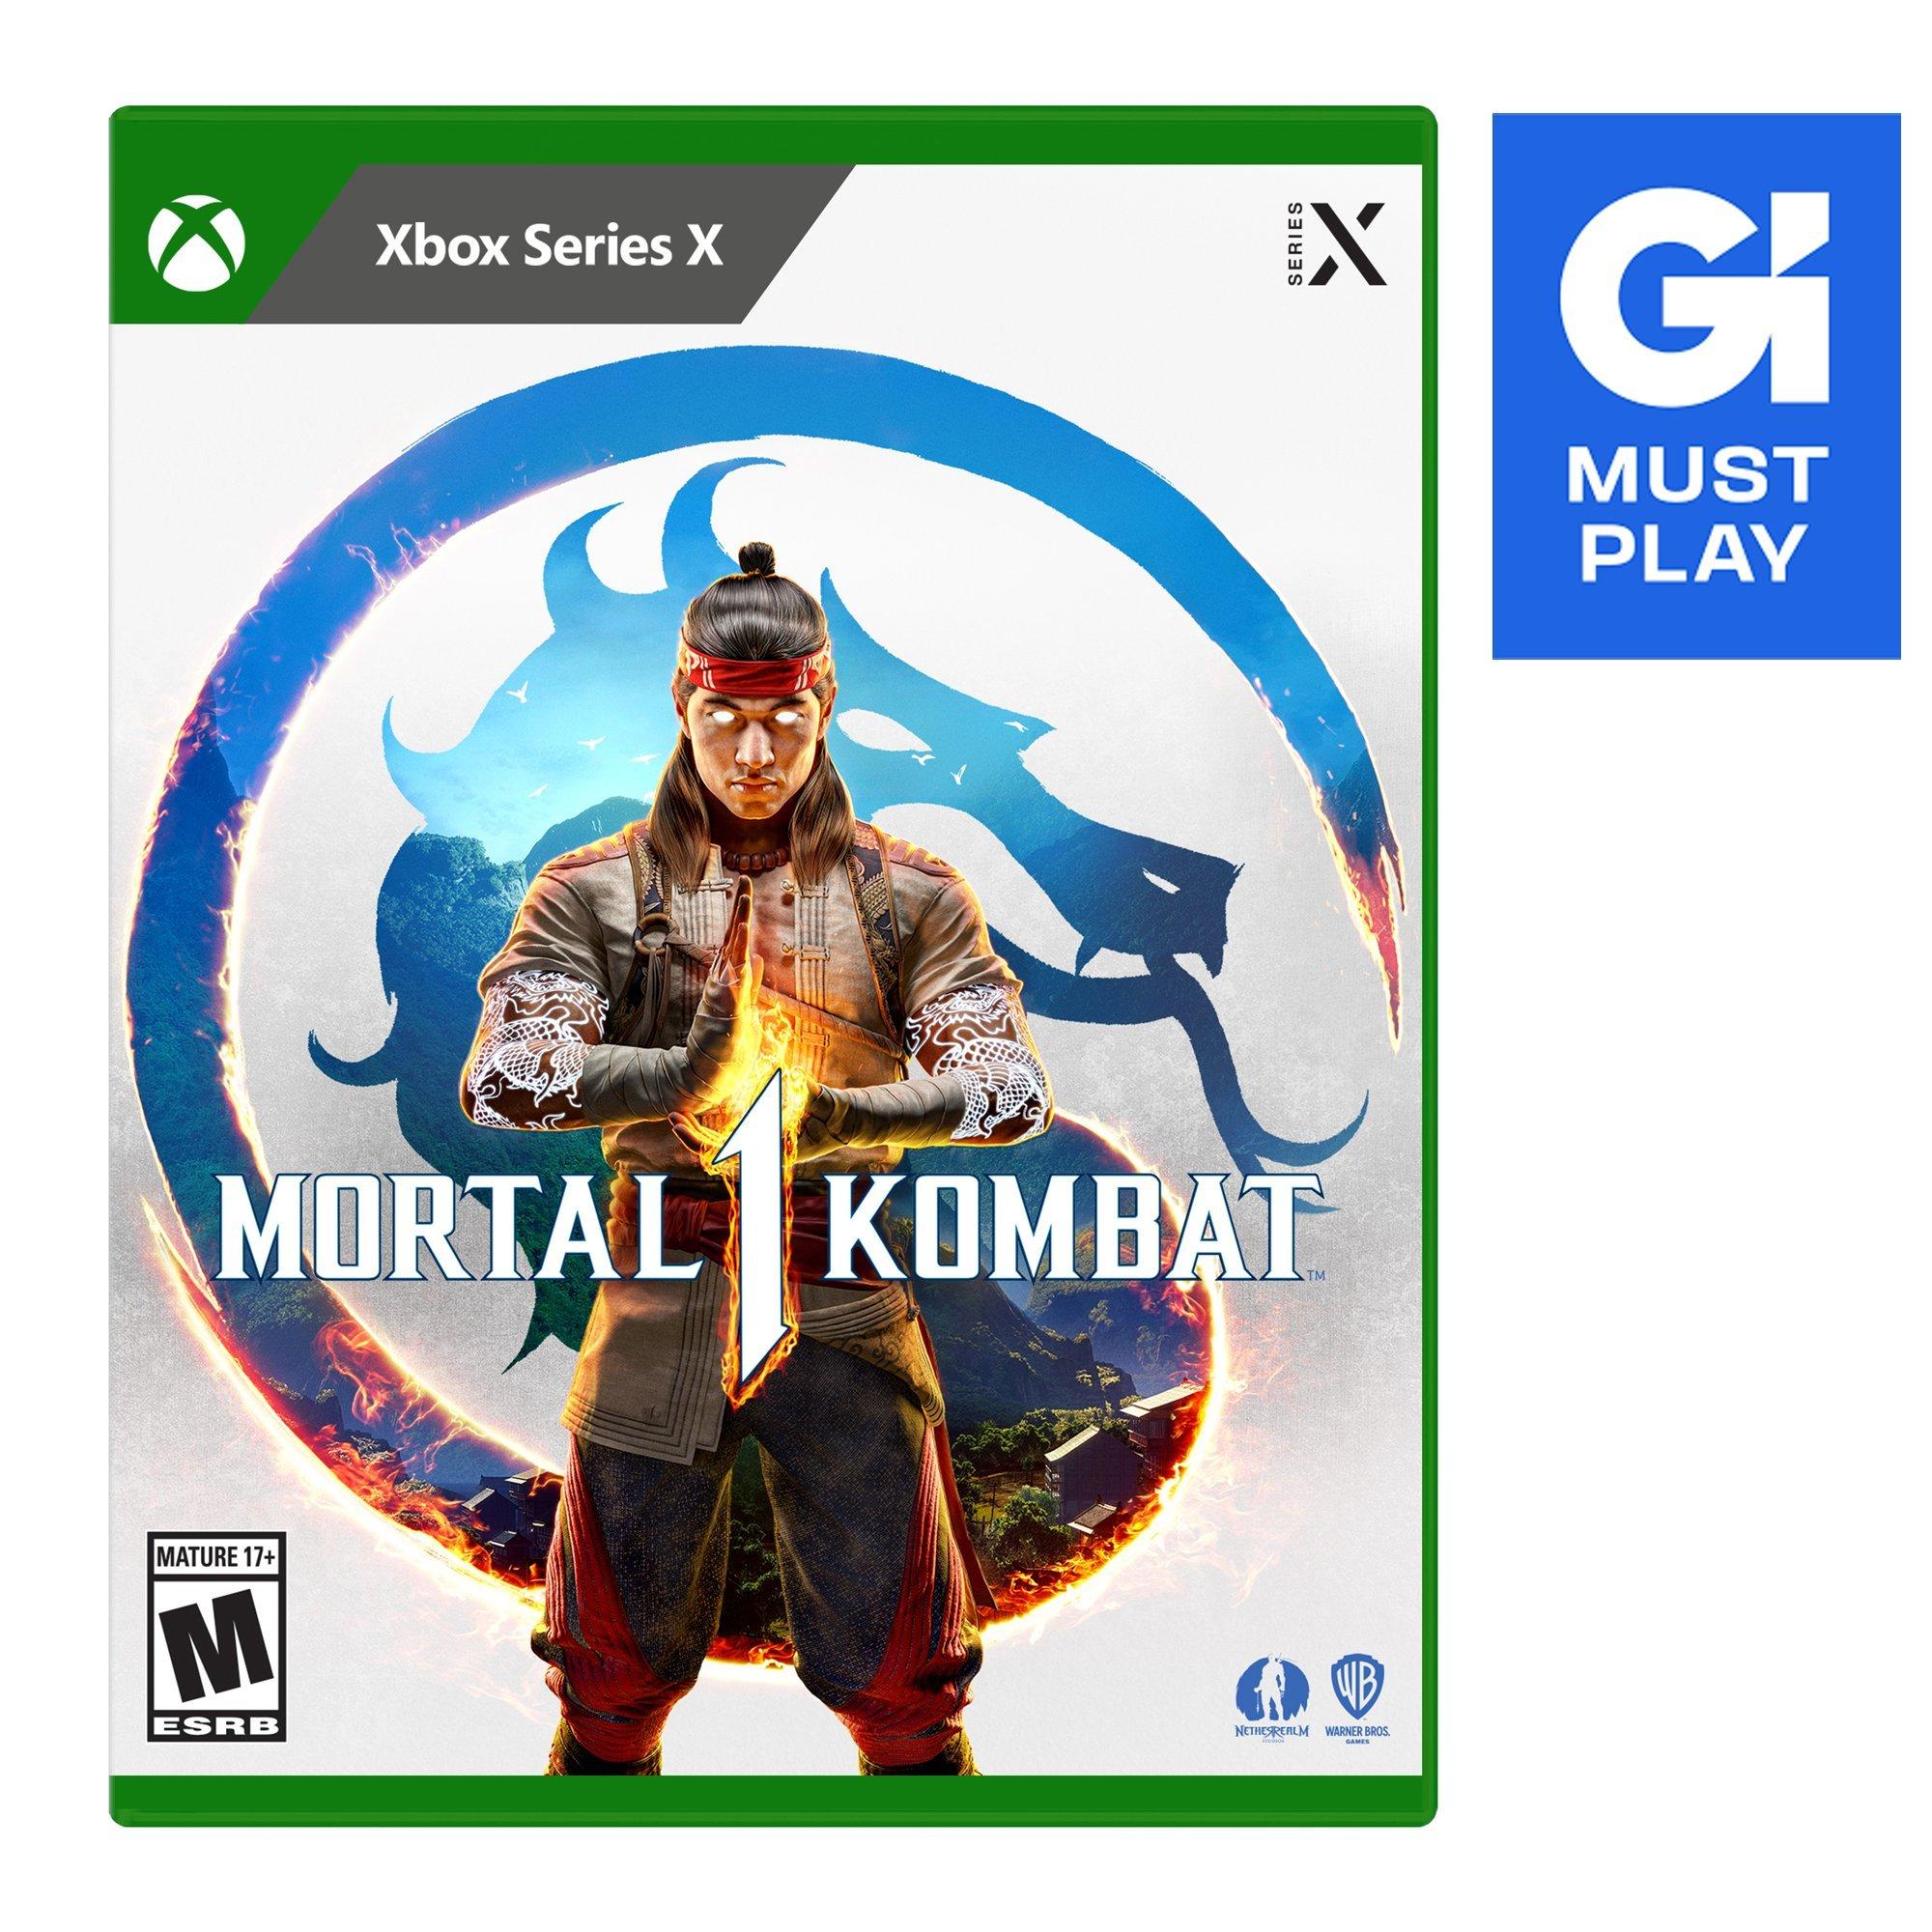 Mortal Kombat 1 is available on PC, PlayStation 5, Xbox Series X